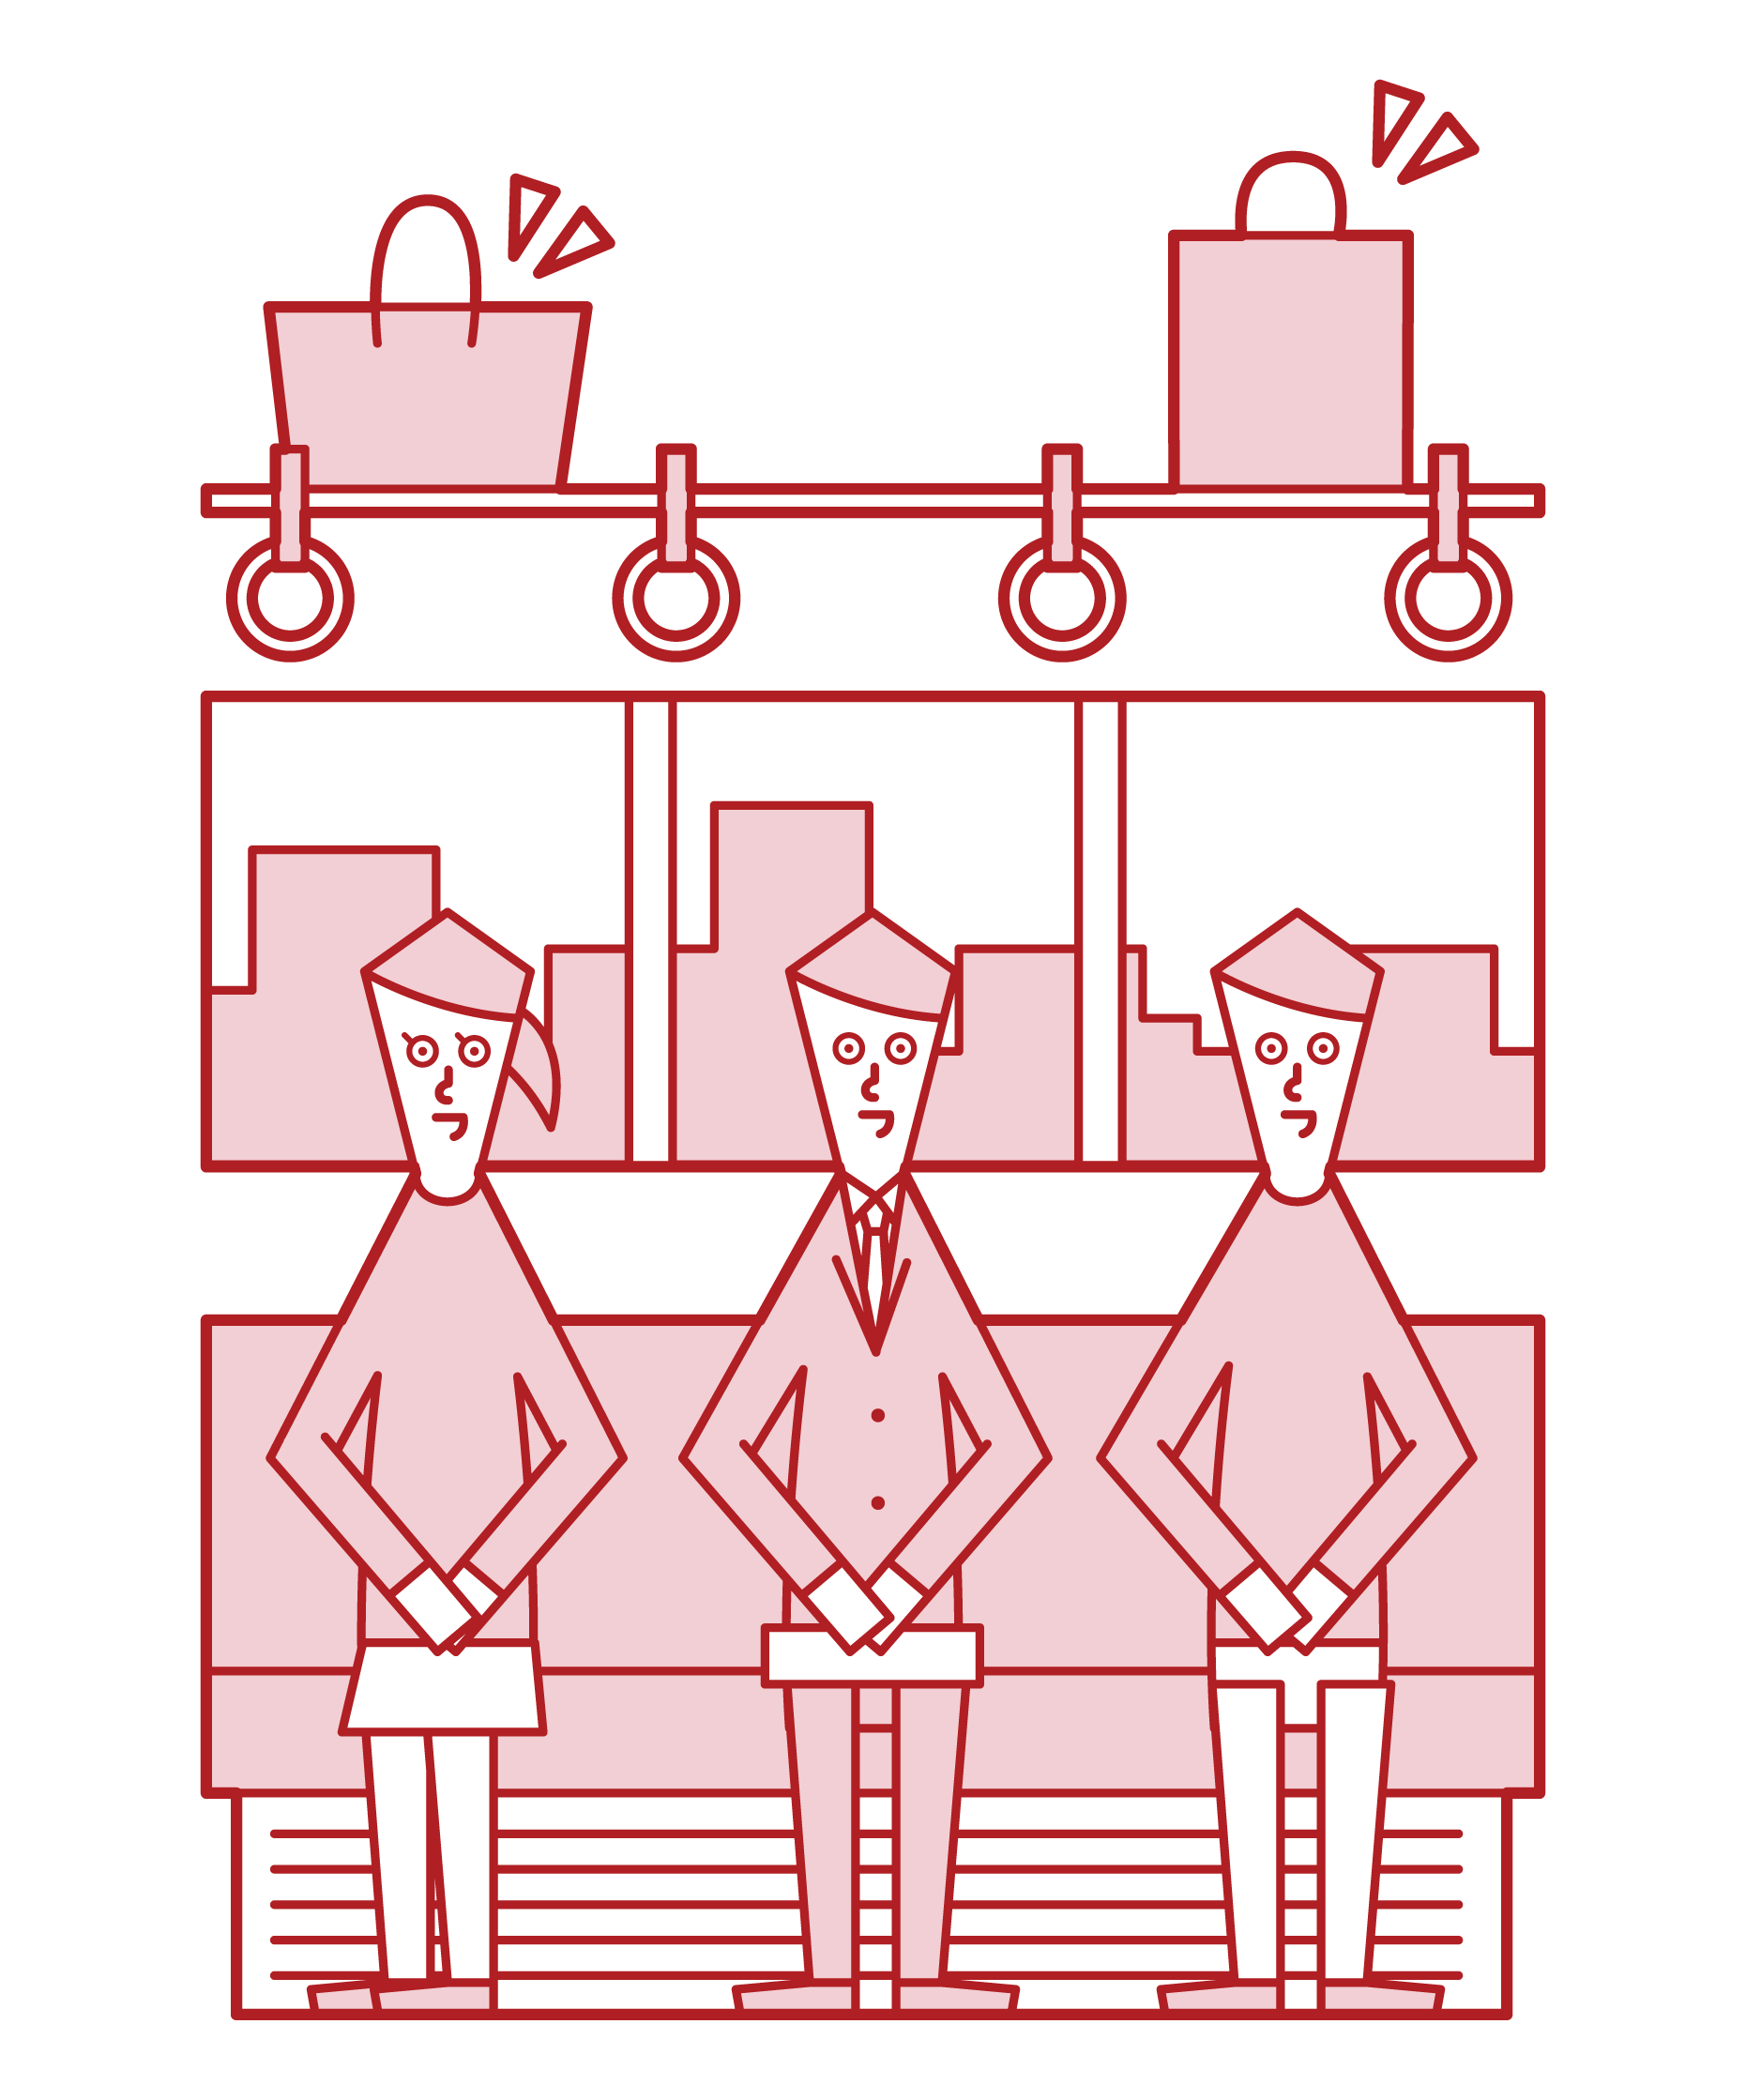 Illustration of a person putting his luggage on a net shelf on a train